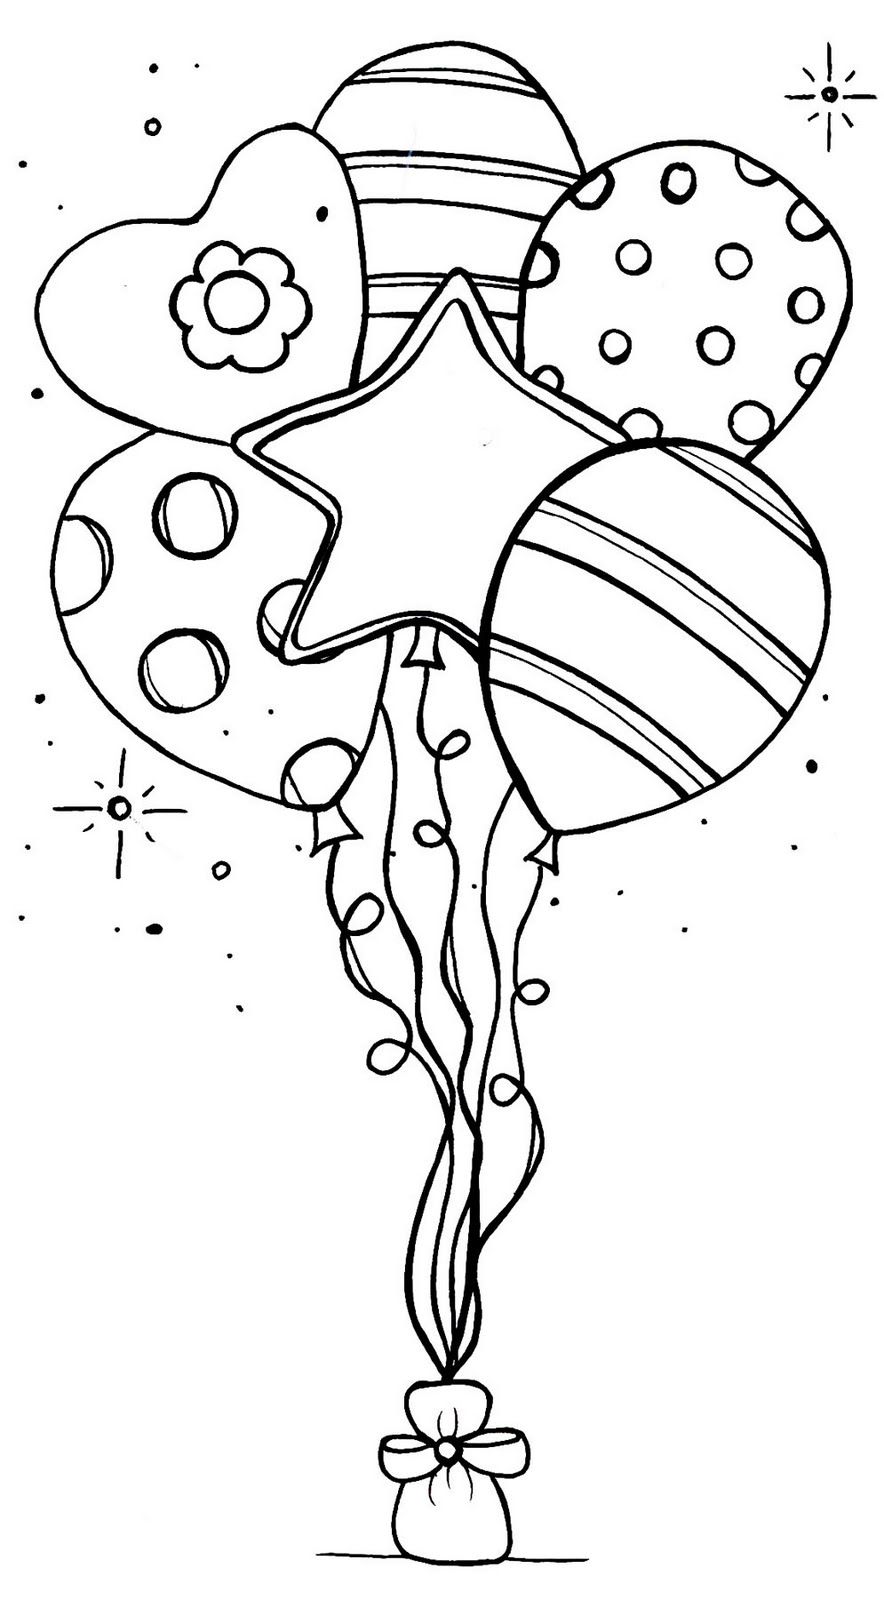 Animal Balloons Coloring Pages - Coloring Pages For All Ages